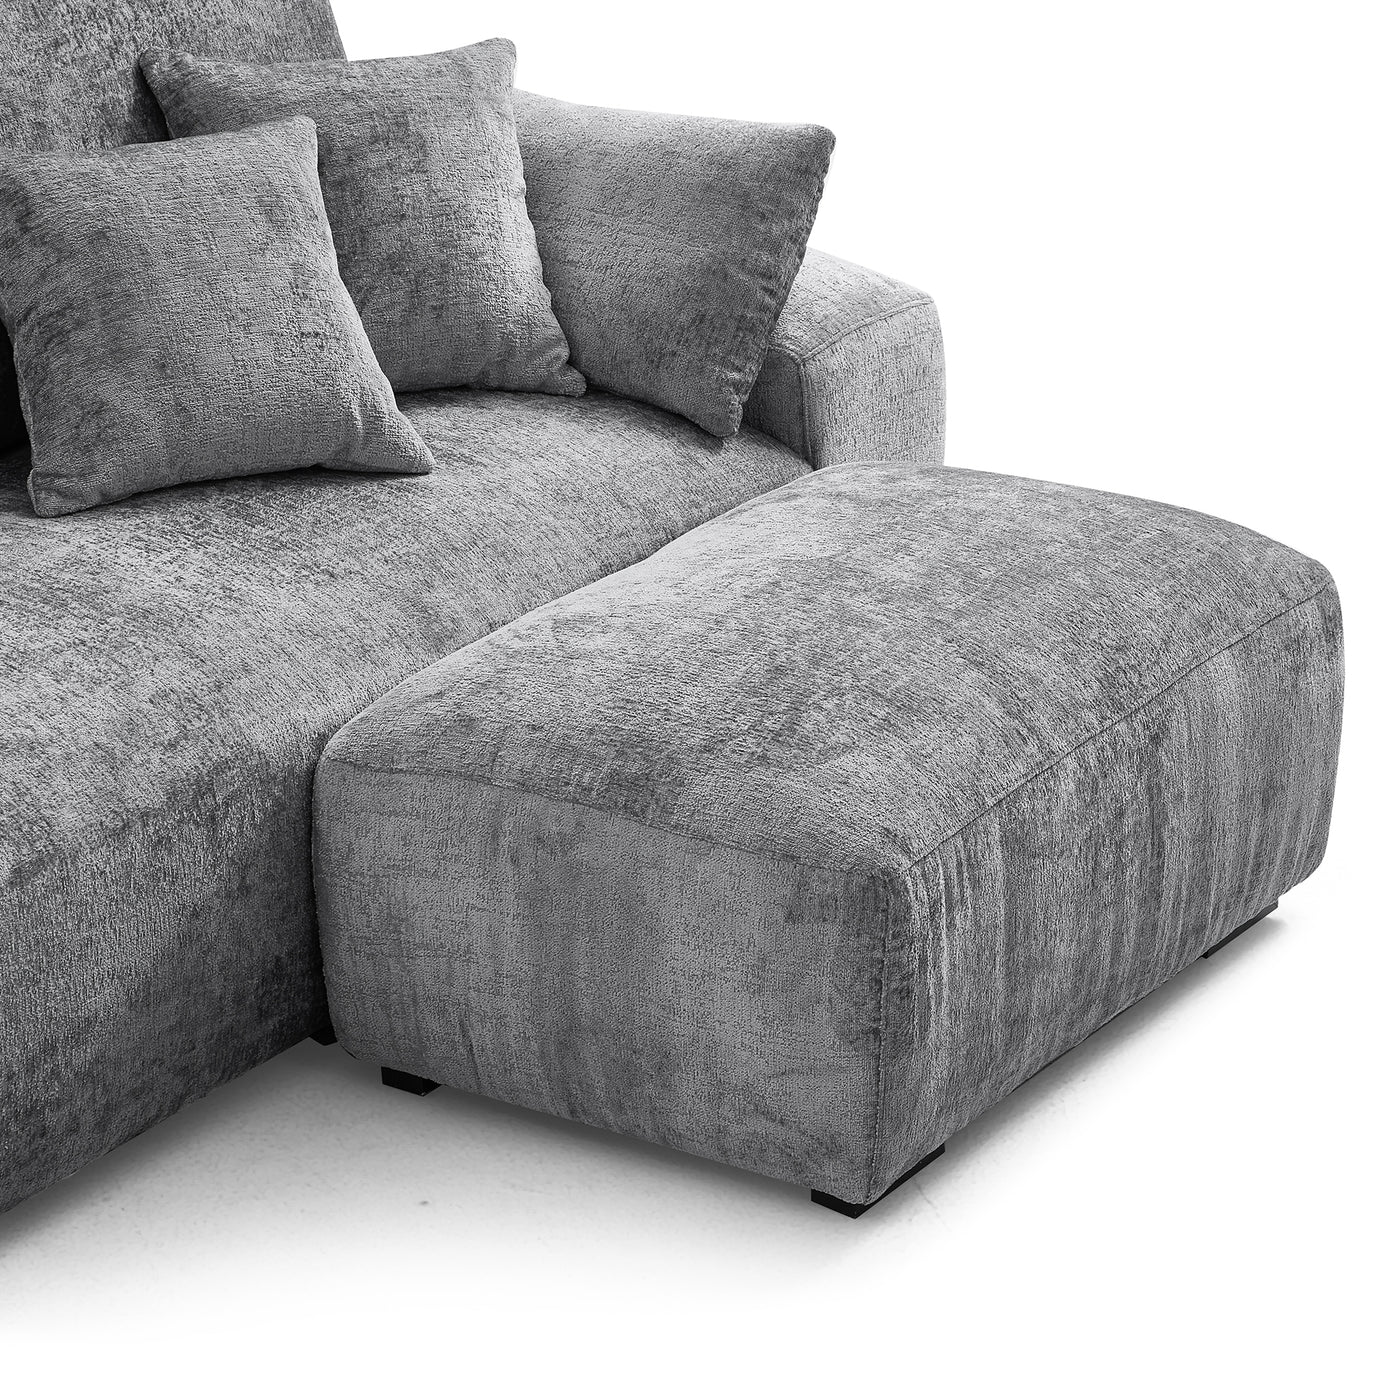 The Empress Beige Sofa and Ottoman-Gray